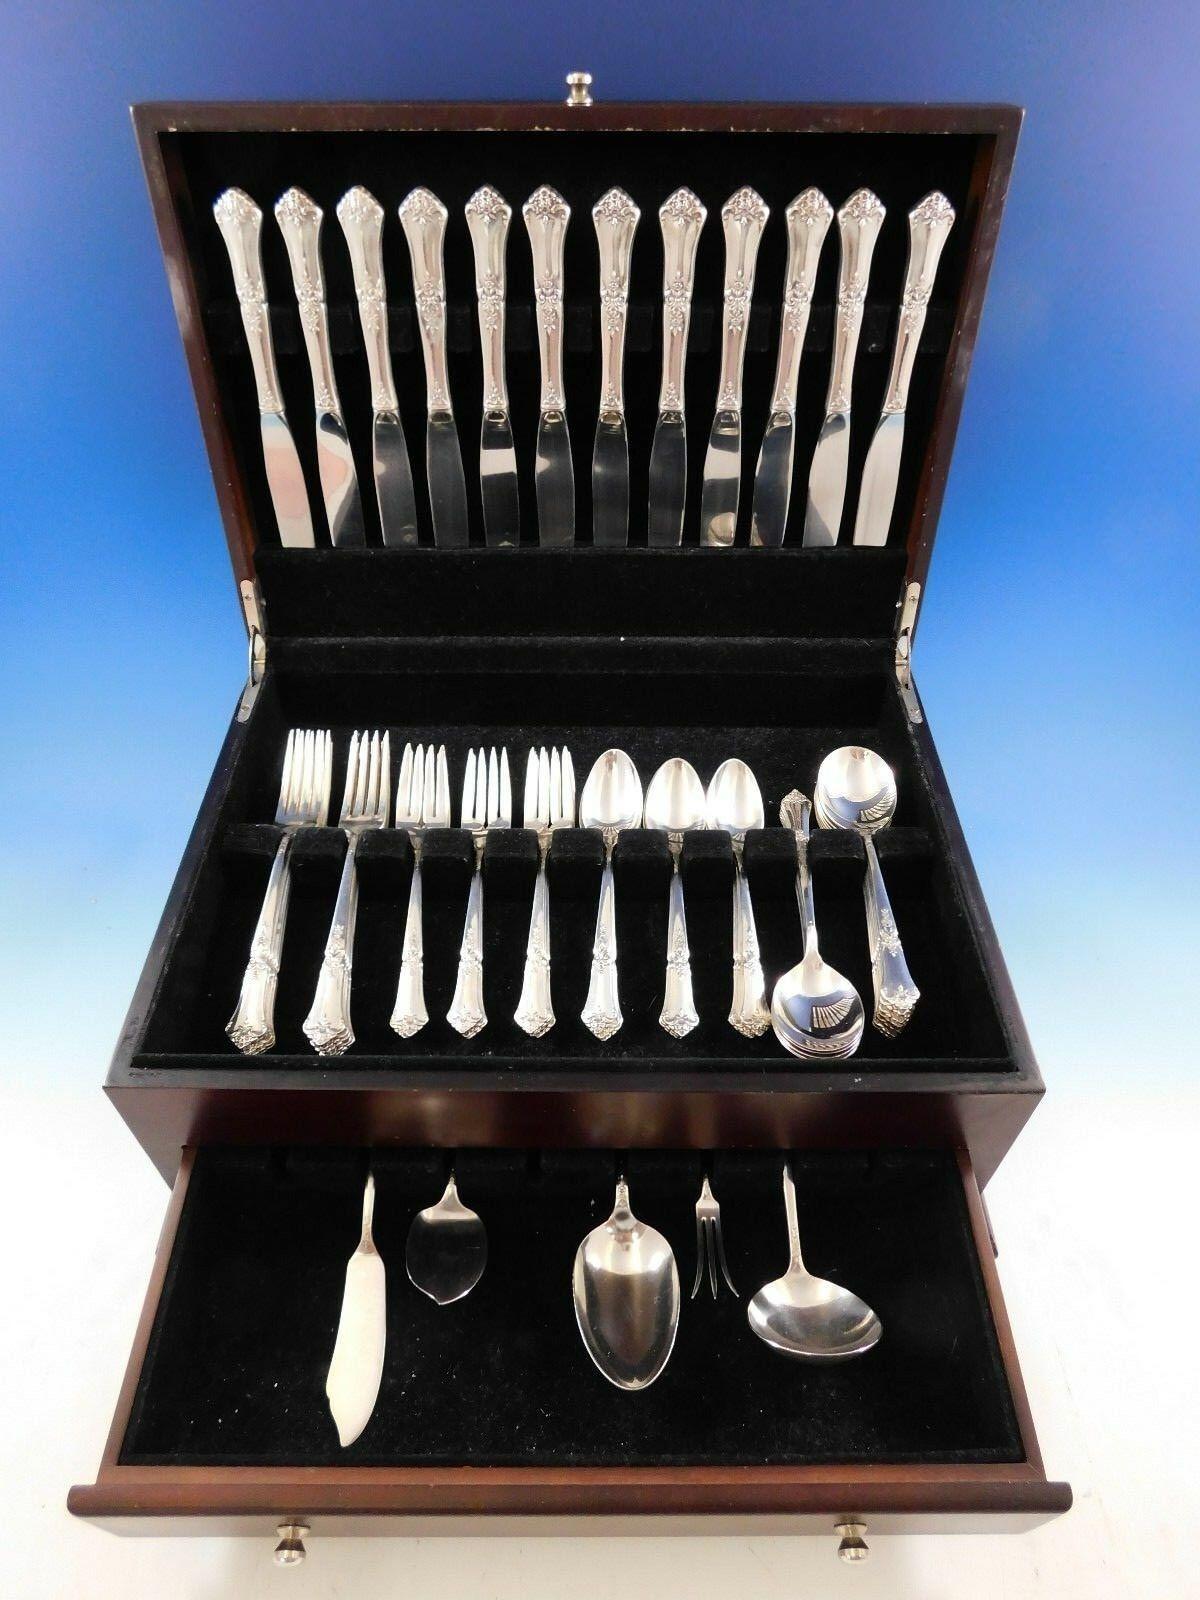 Beautiful stately by State House sterling silver flatware set, 66 pieces. This set includes:

12 knives, 9 1/8